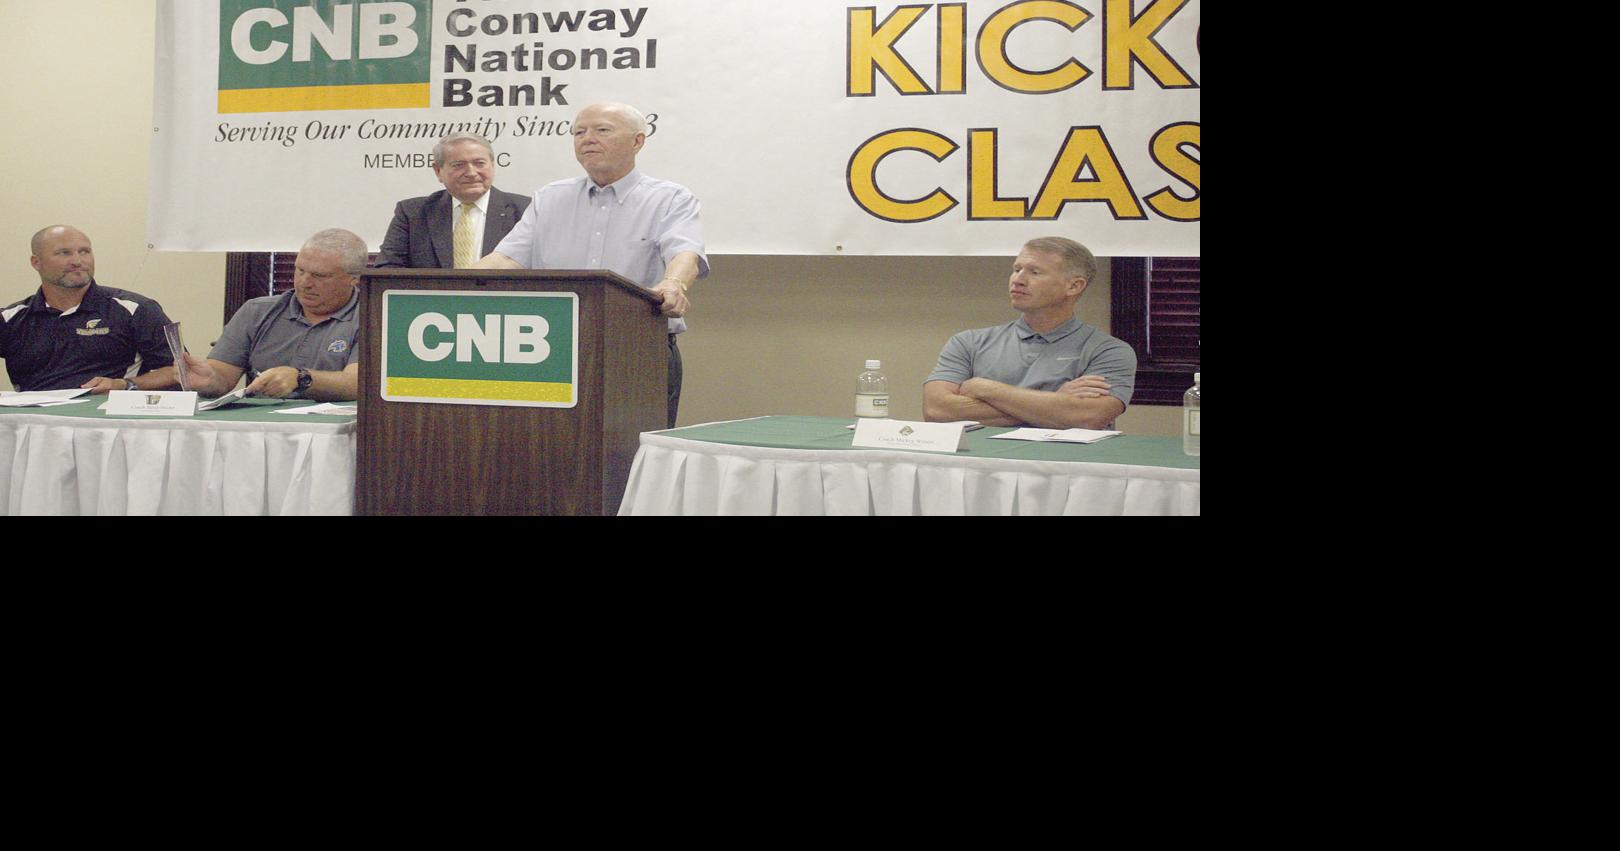 CNB Kickoff Classic makes annual return tomorrow in Myrtle Beach